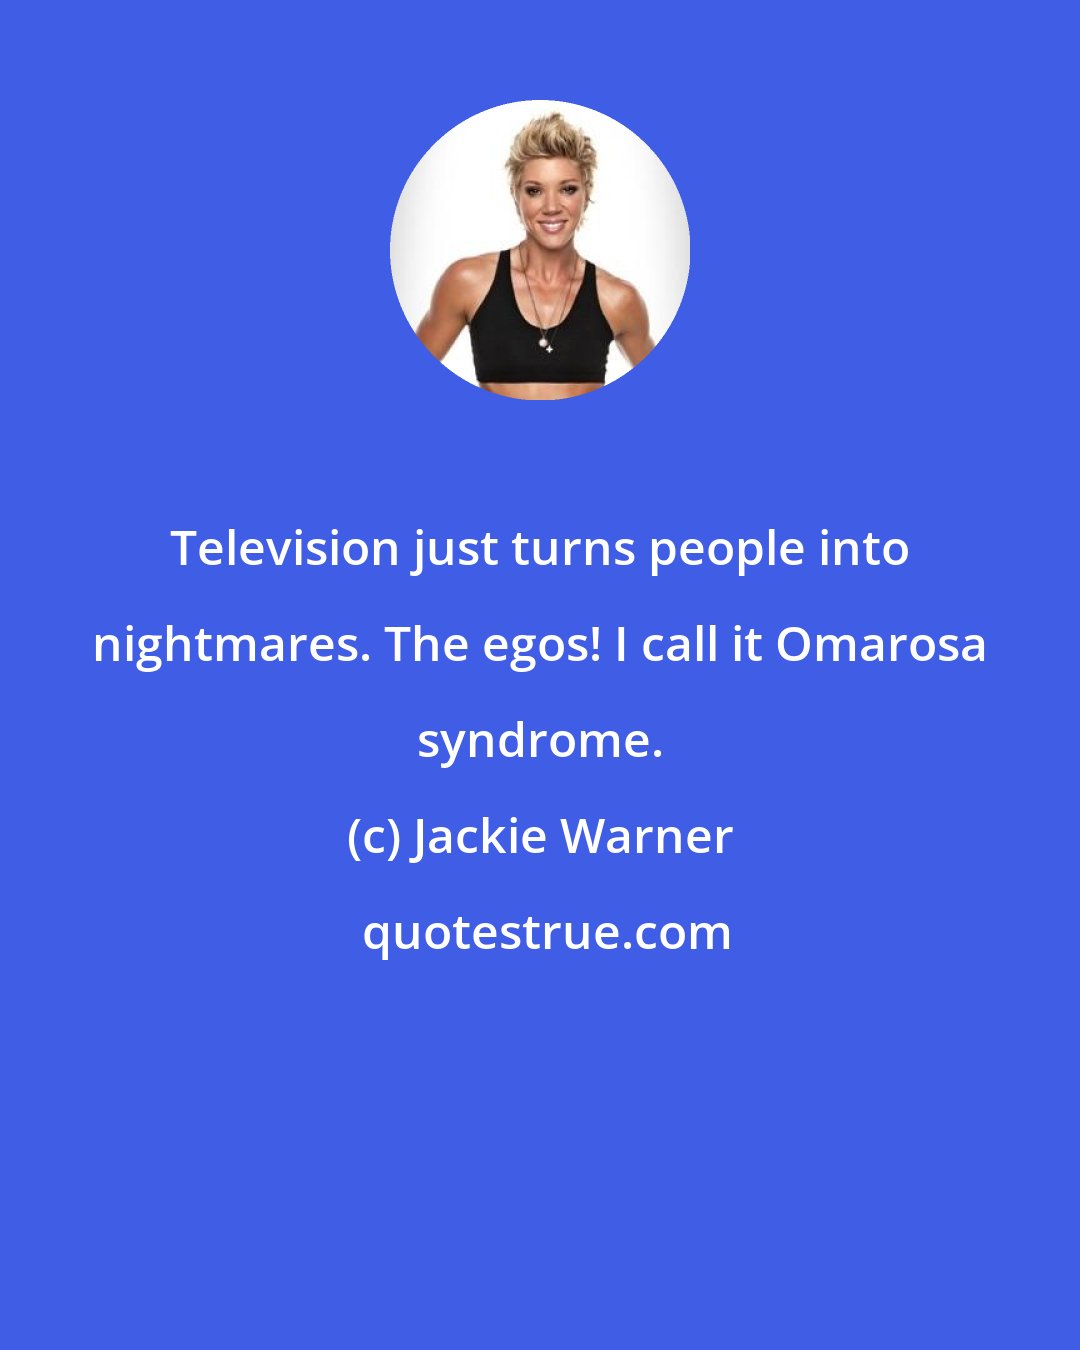 Jackie Warner: Television just turns people into nightmares. The egos! I call it Omarosa syndrome.